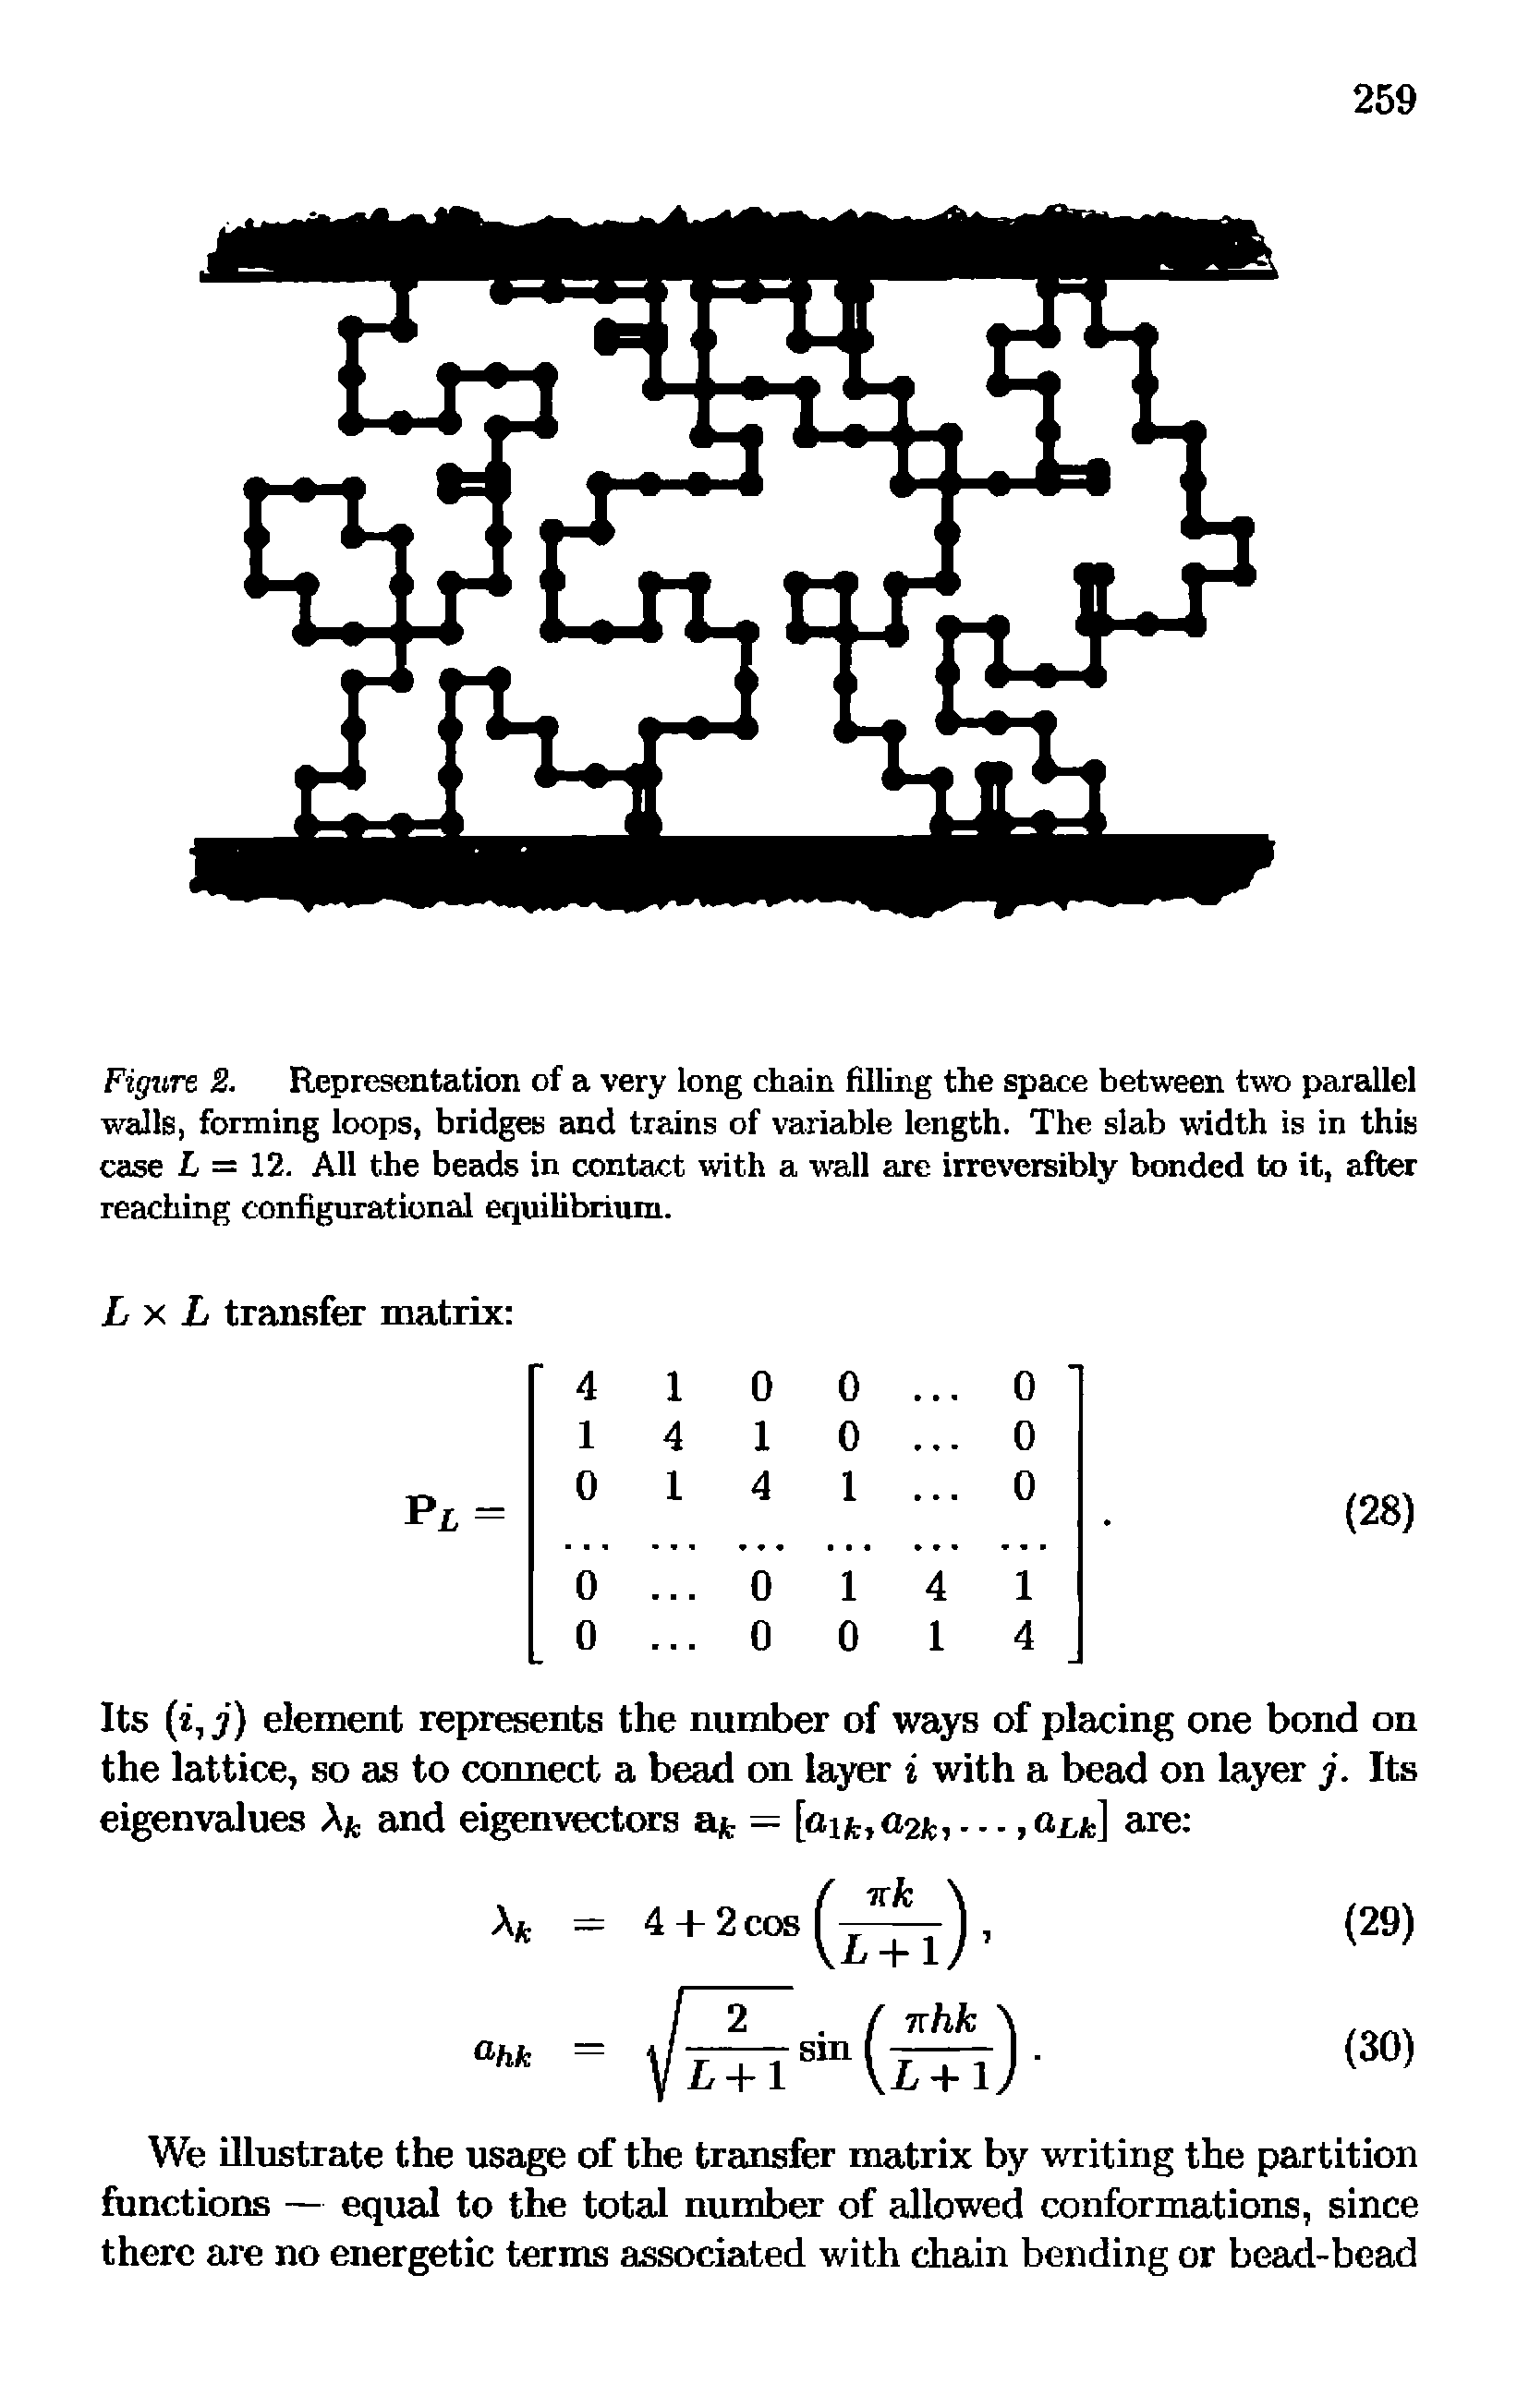 Figure 2. R reseutation of a very long chain filling the space between two parallel walls, forming loops, bridges tnd trains of variable length. The slab width is in this case L = 12. All the beads in contact with a wall arc irreversibly bonded to it, after reaching configurational equilibrium.